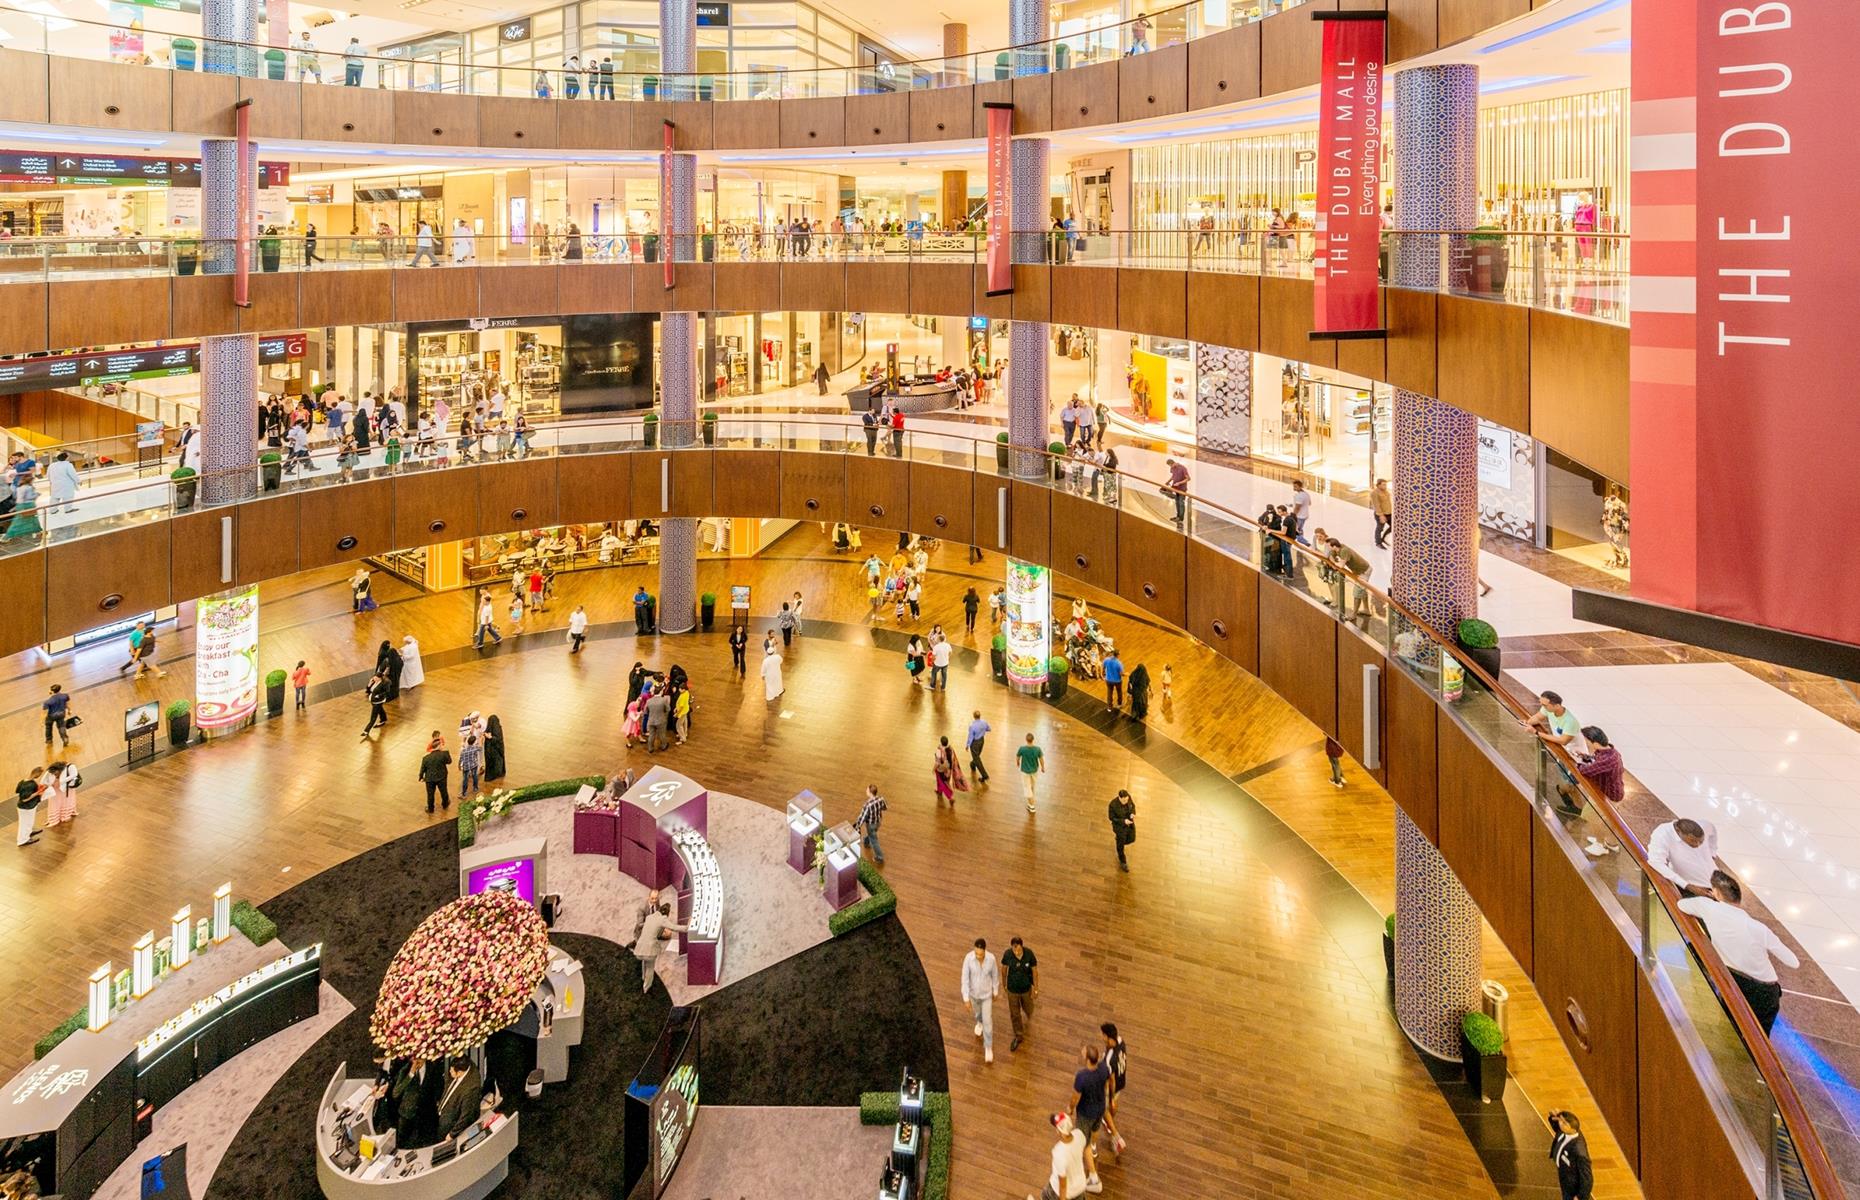 Malls with sales over 1 billion.